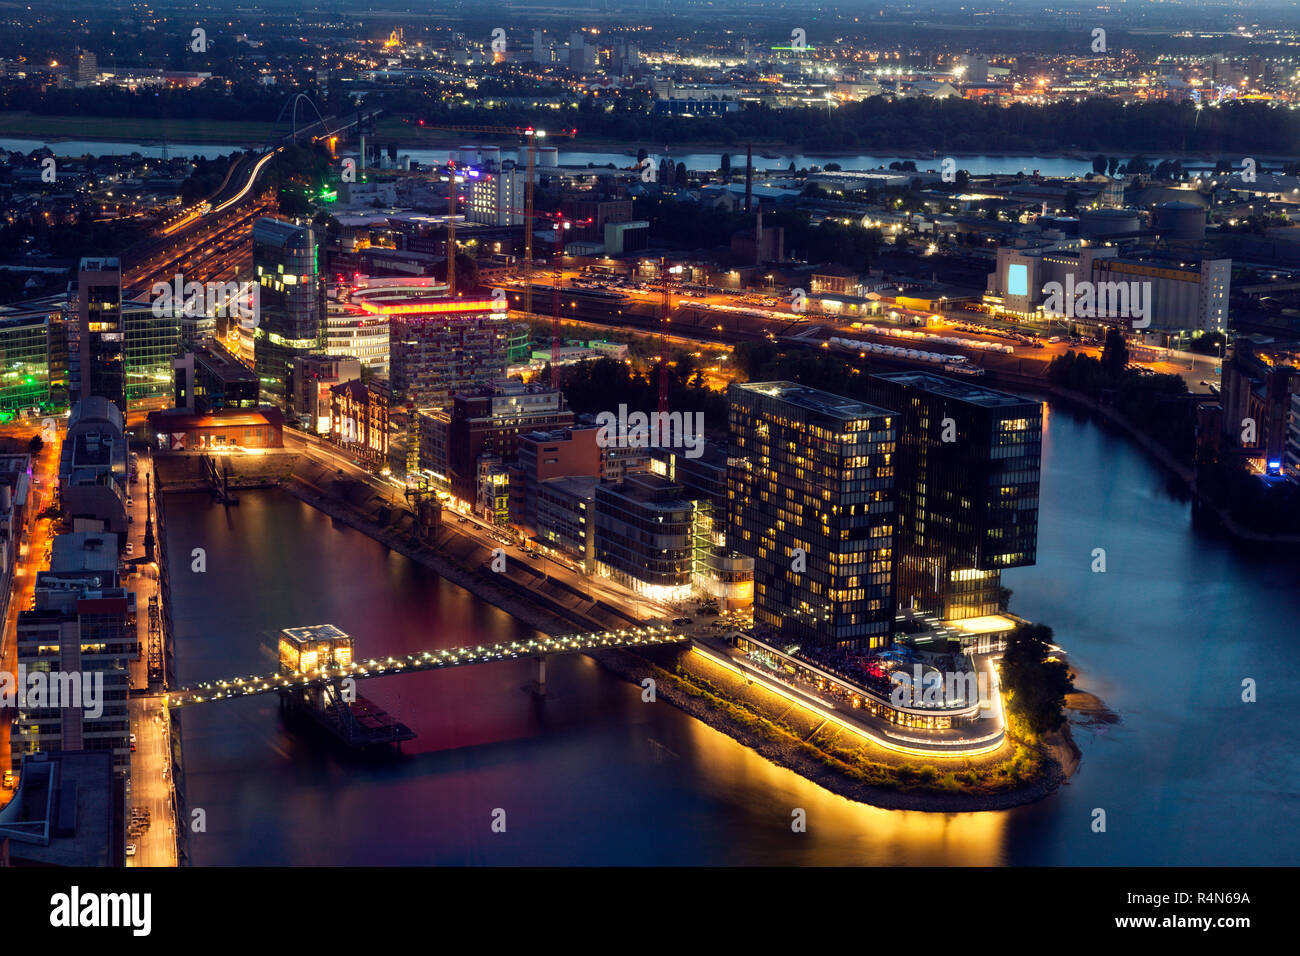 Aerial view of Dusseldorf at night in Germany Stock Photo